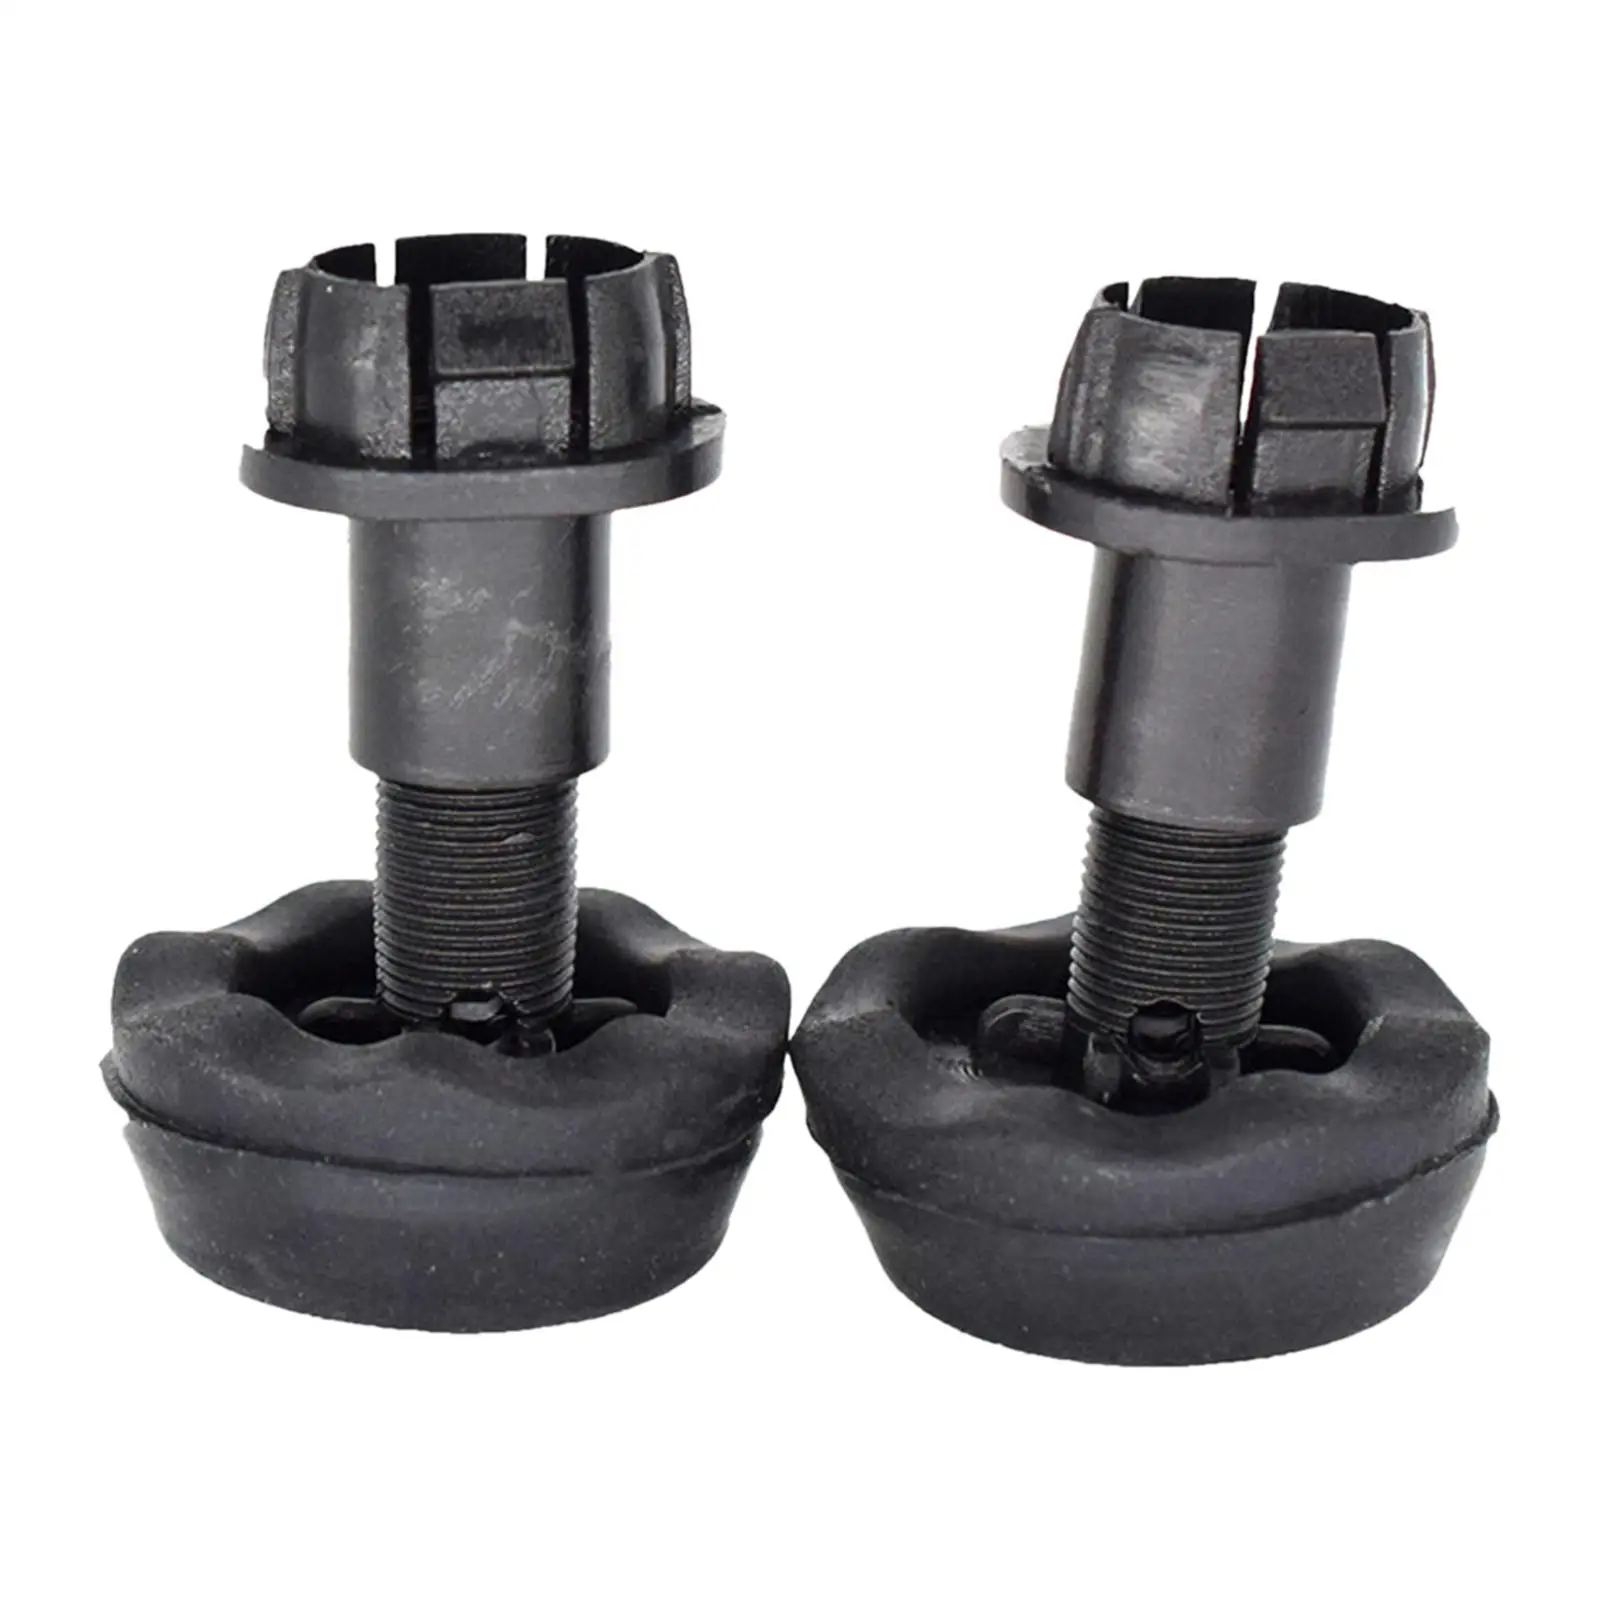 2 Pieces Engine Cover Buffer Stop Damping Pad for Ford C-Max 2011-2019